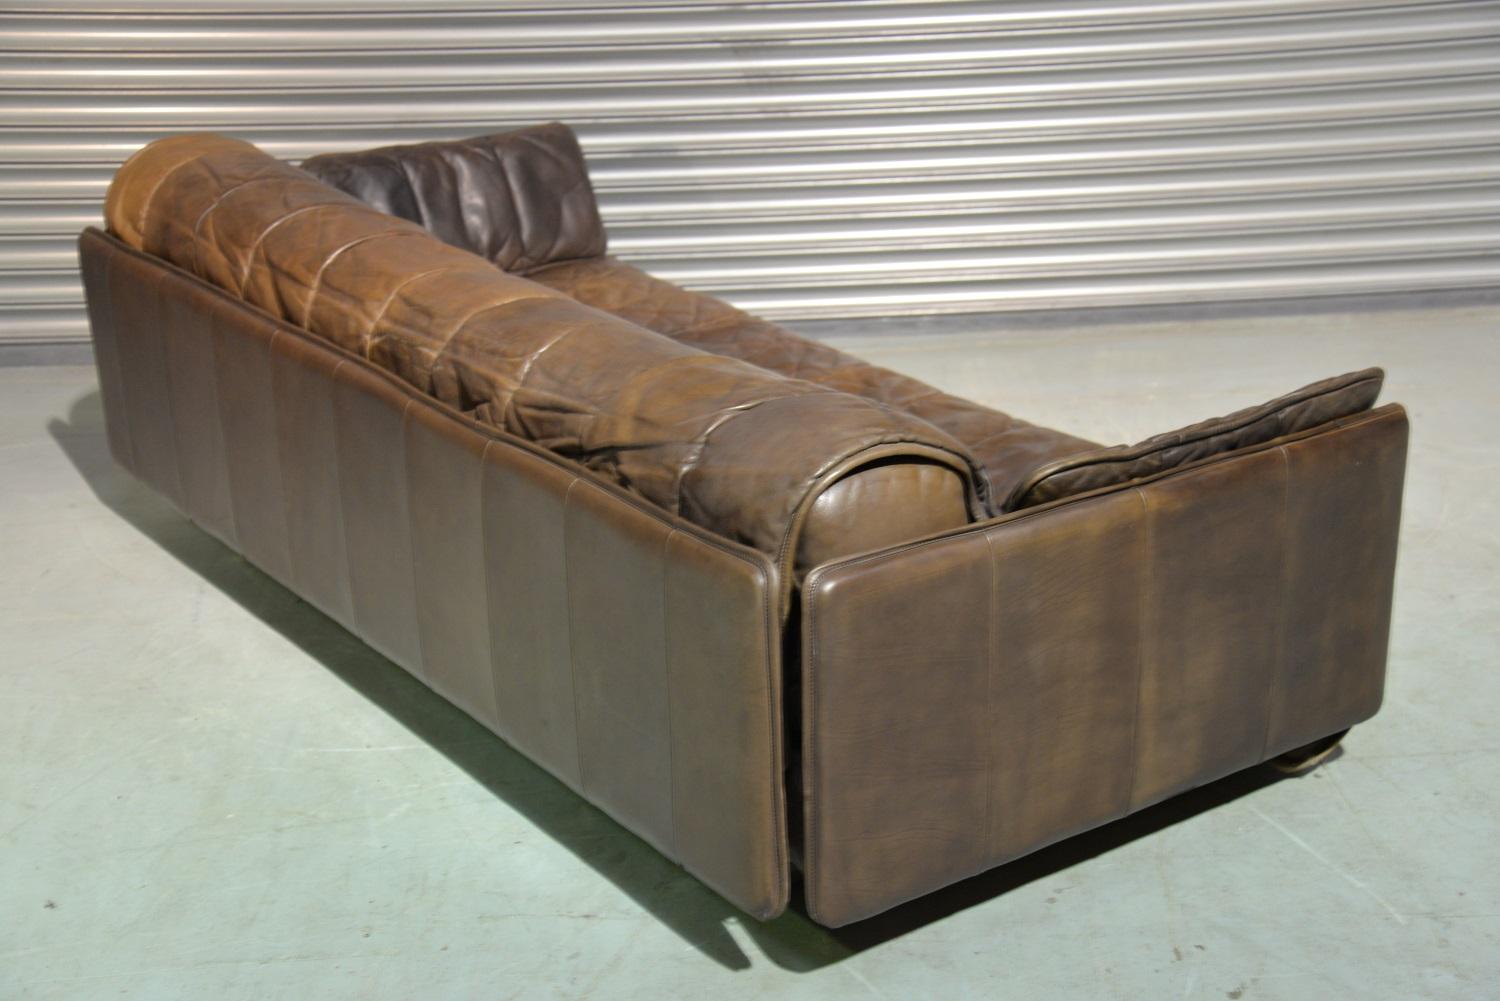 Vintage De Sede Patchwork Leather Sofa / Daybed, Switzerland 1970s In Good Condition For Sale In Fen Drayton, Cambridgeshire